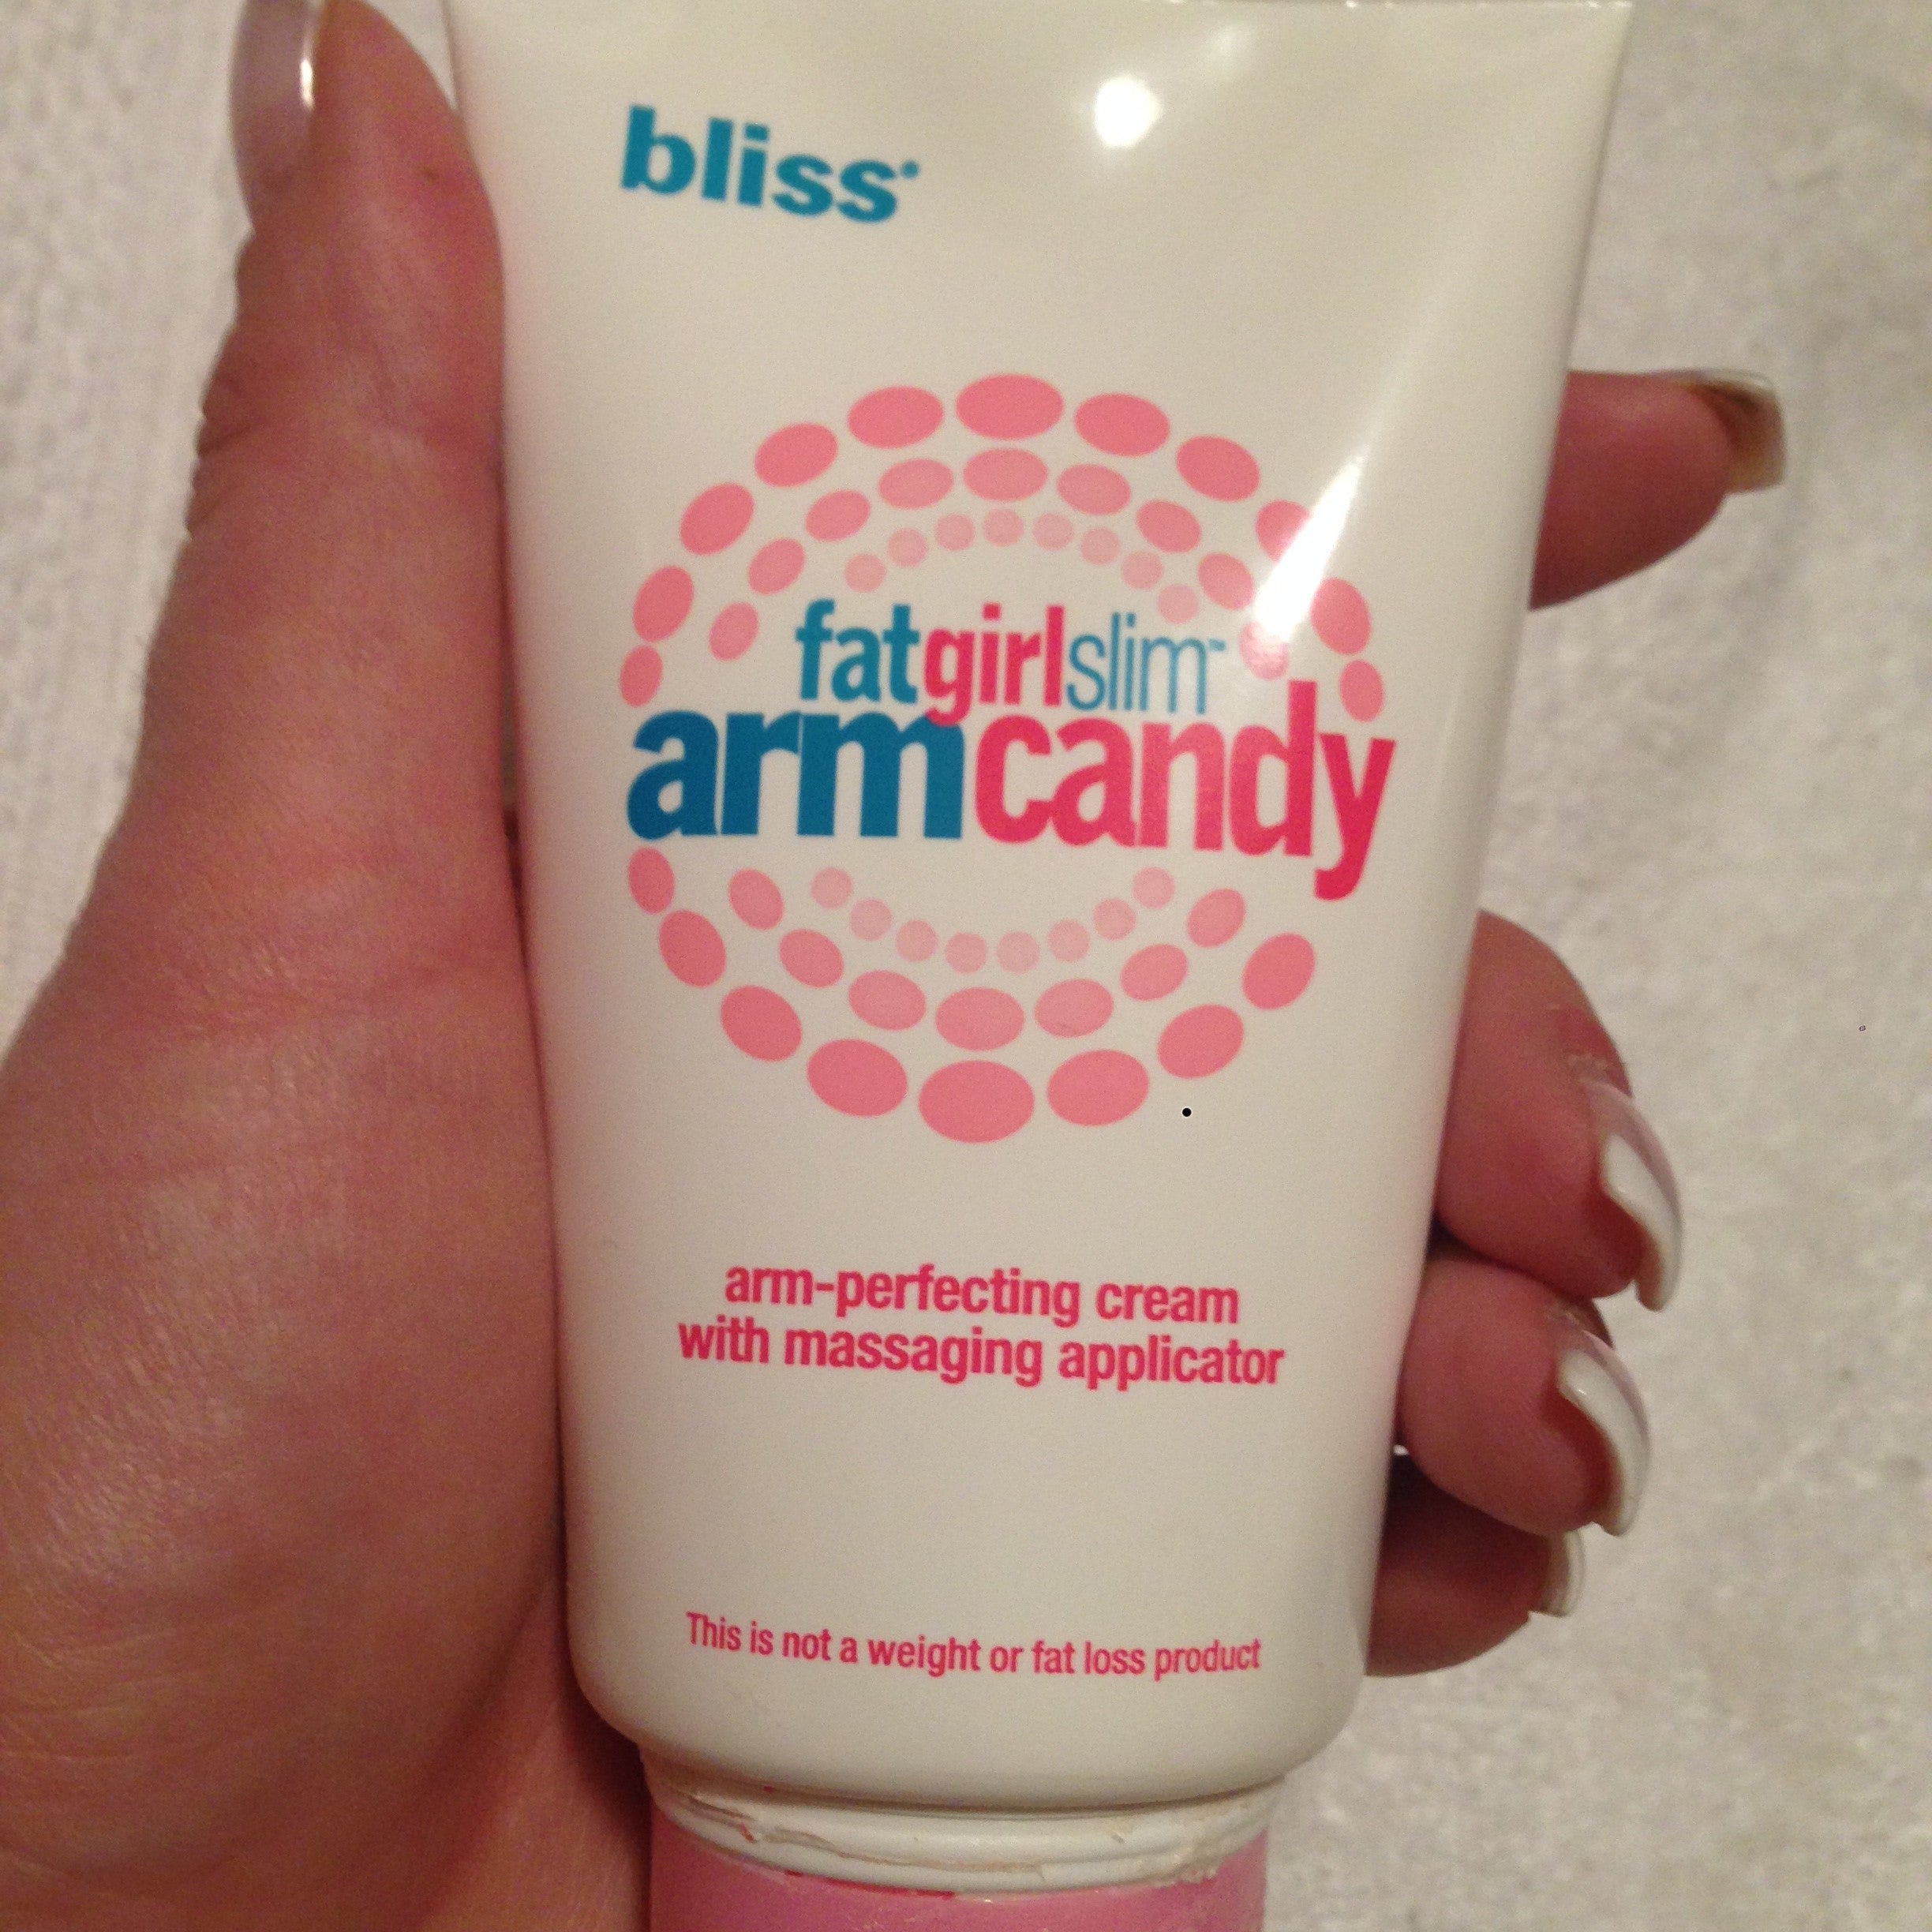 Review, Ingredients: Bliss fatgirlslim Arm Candy Arm-Perfecting Cream - Go Sleeveless This Spring/Summer!